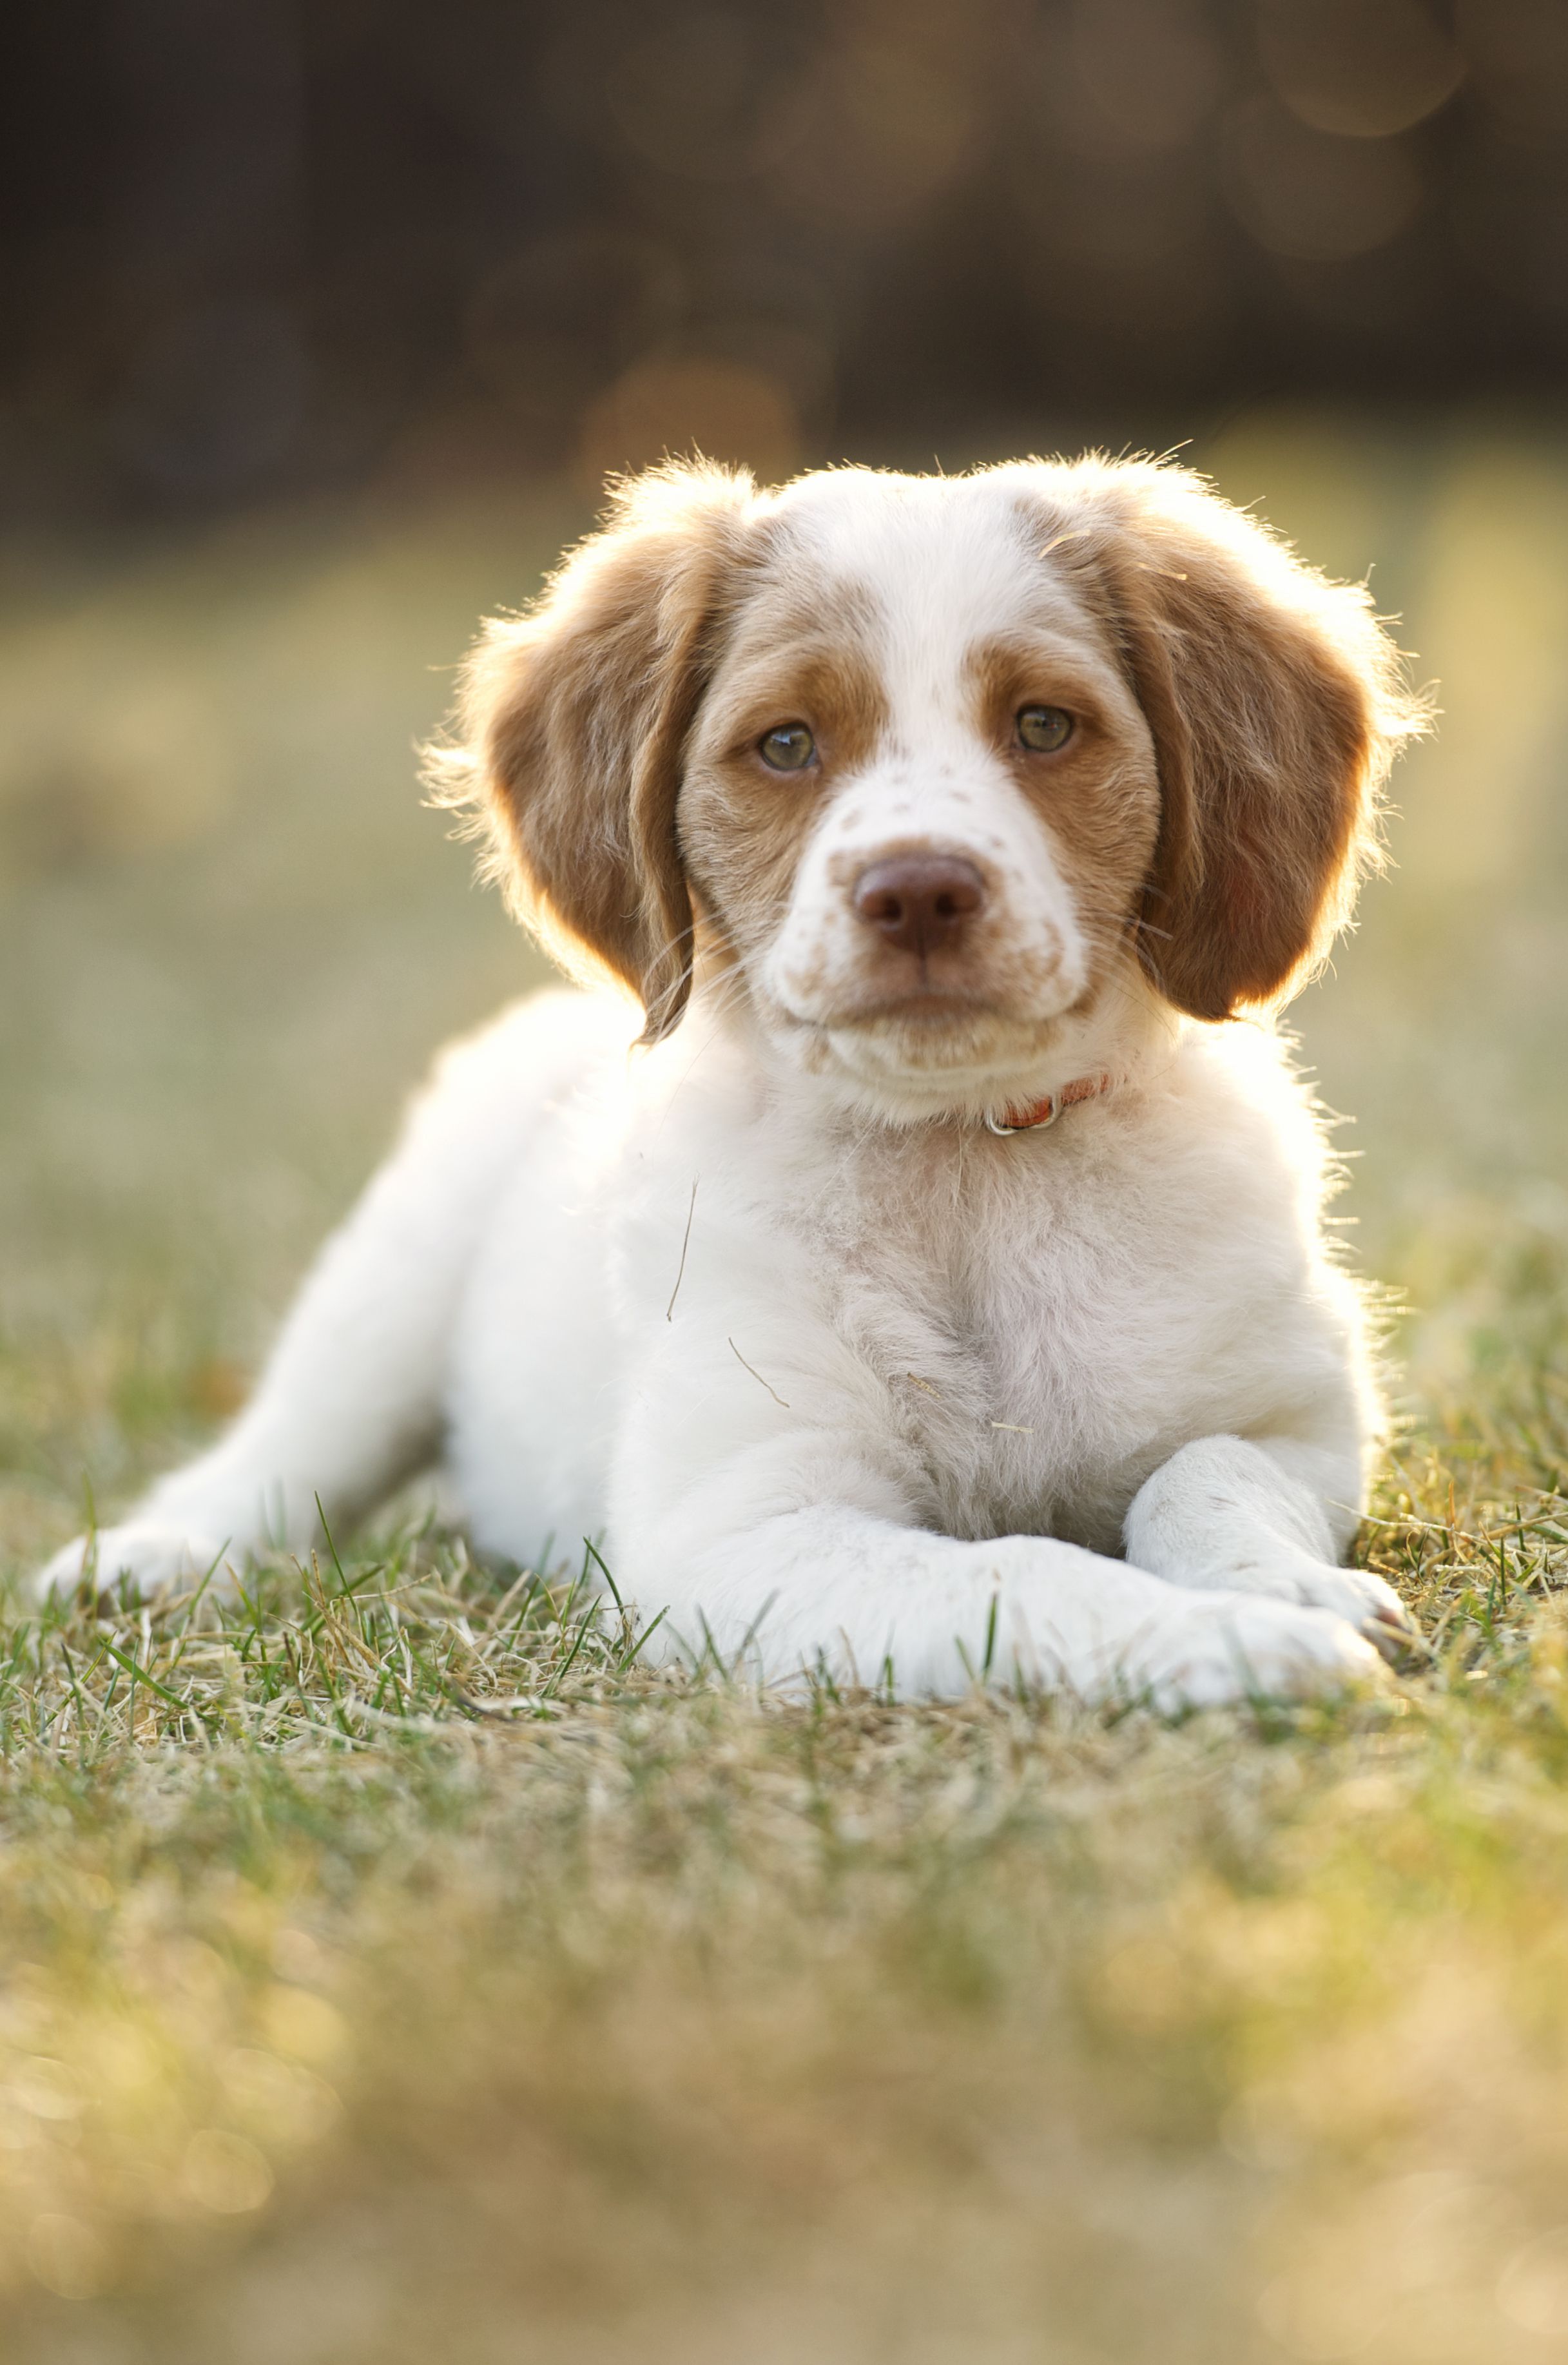 25 Cutest Dog Breeds - Most Adorable Dogs